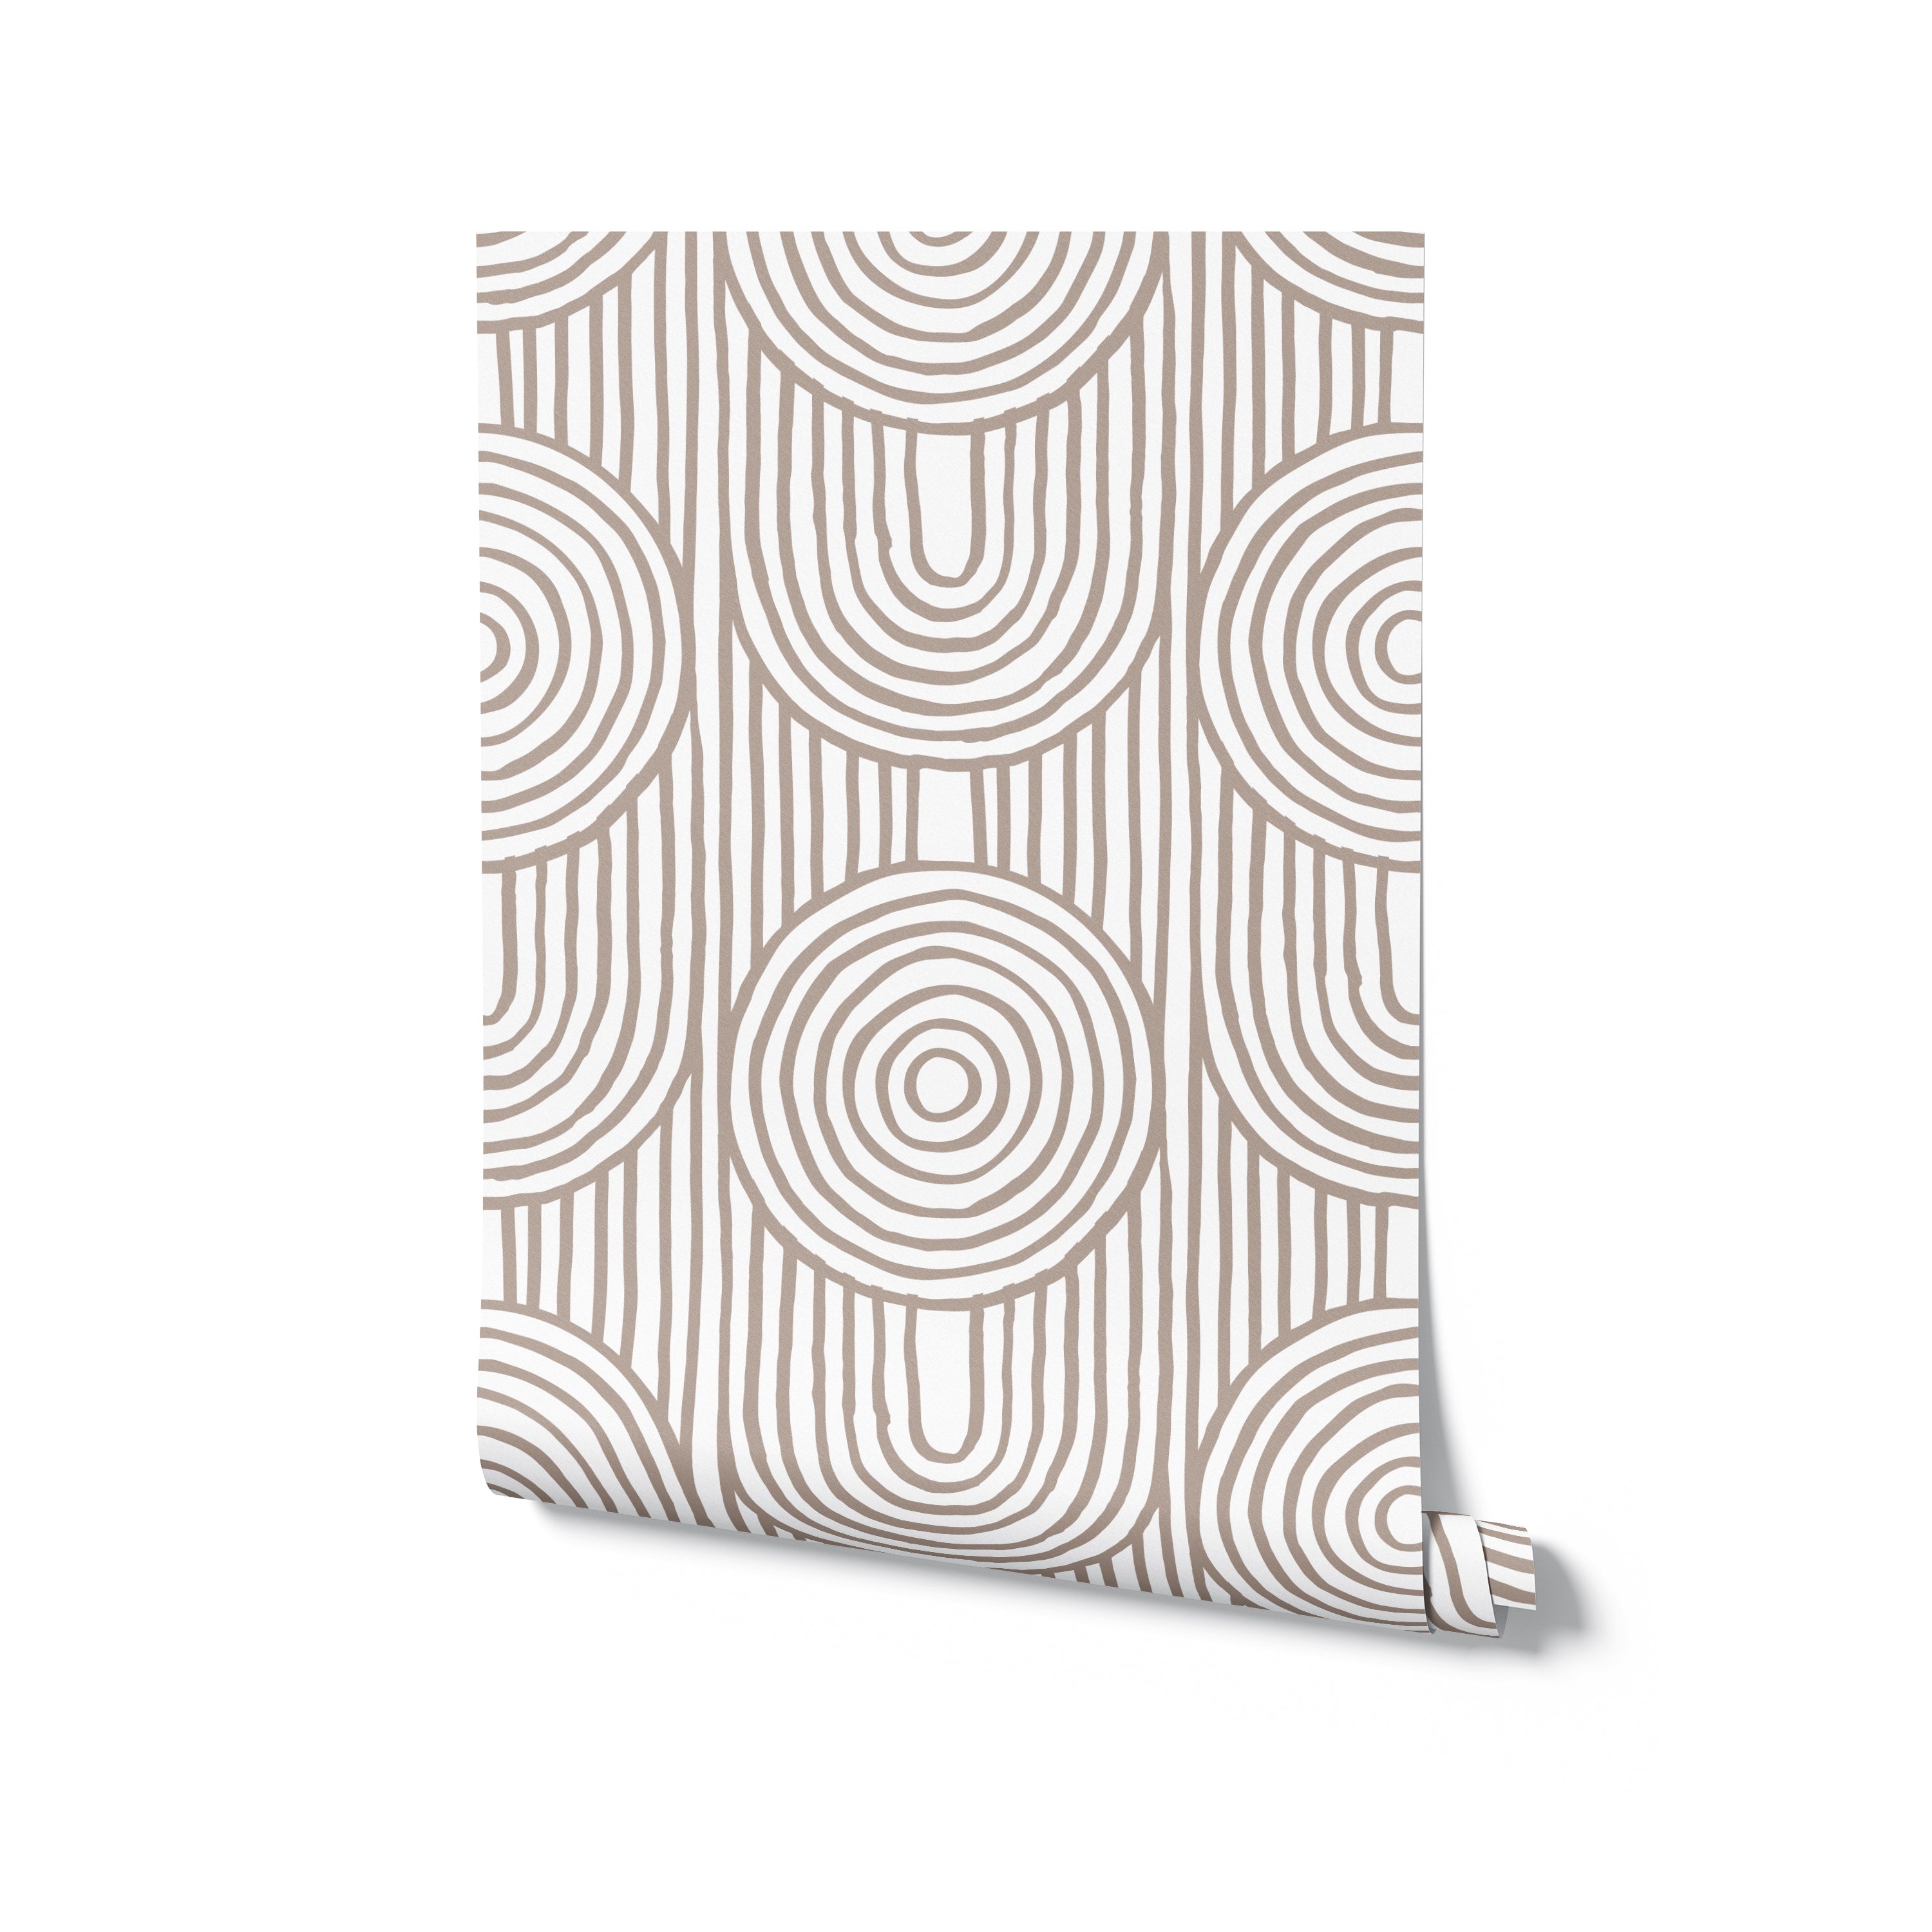 A roll of Zen Abstract Wallpaper, elegantly unrolled at one corner to reveal its calming pattern of beige concentric circles on a white background, representing a sophisticated choice for adding a peaceful ambiance to any room